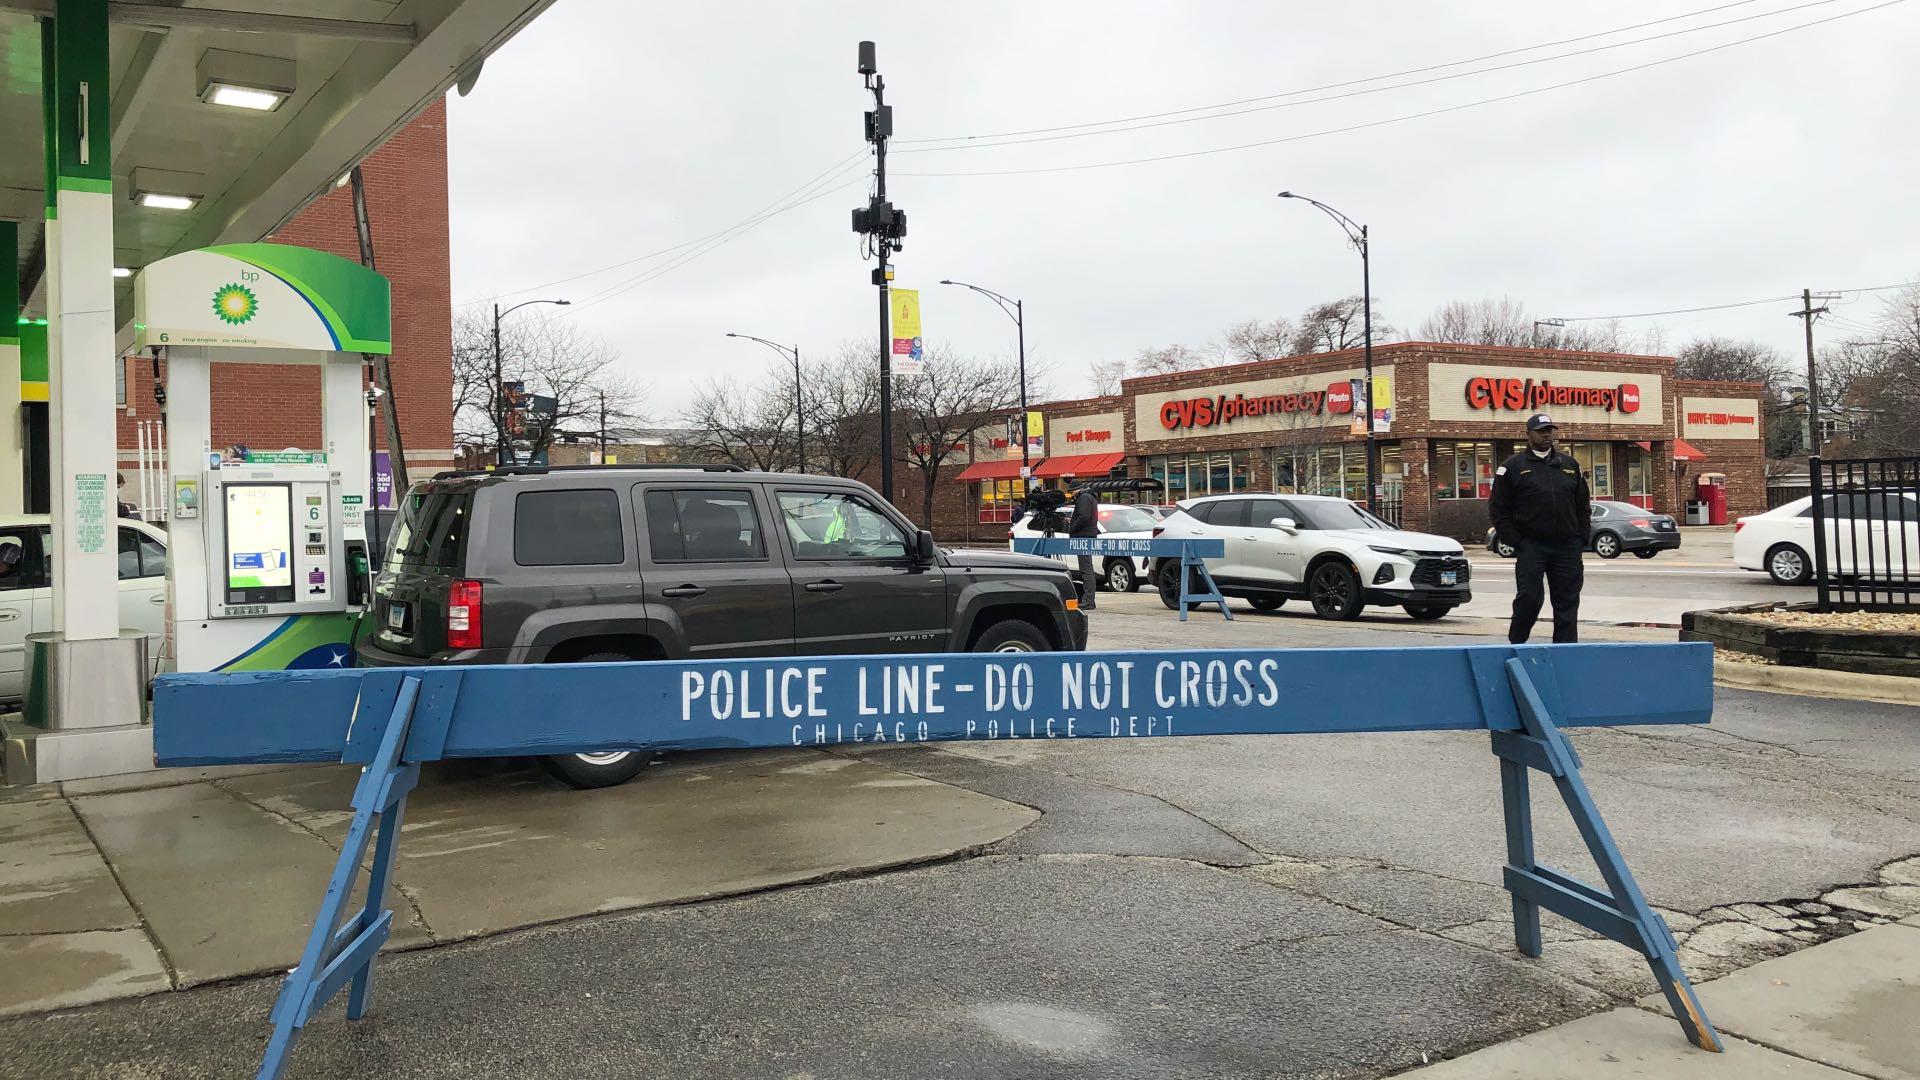 As part of improved logistics, motorists were funneled to a single entrance and exit. Police officers help direct traffic and kept intersections from being blocked. (Patty Wetli / WTTW News)